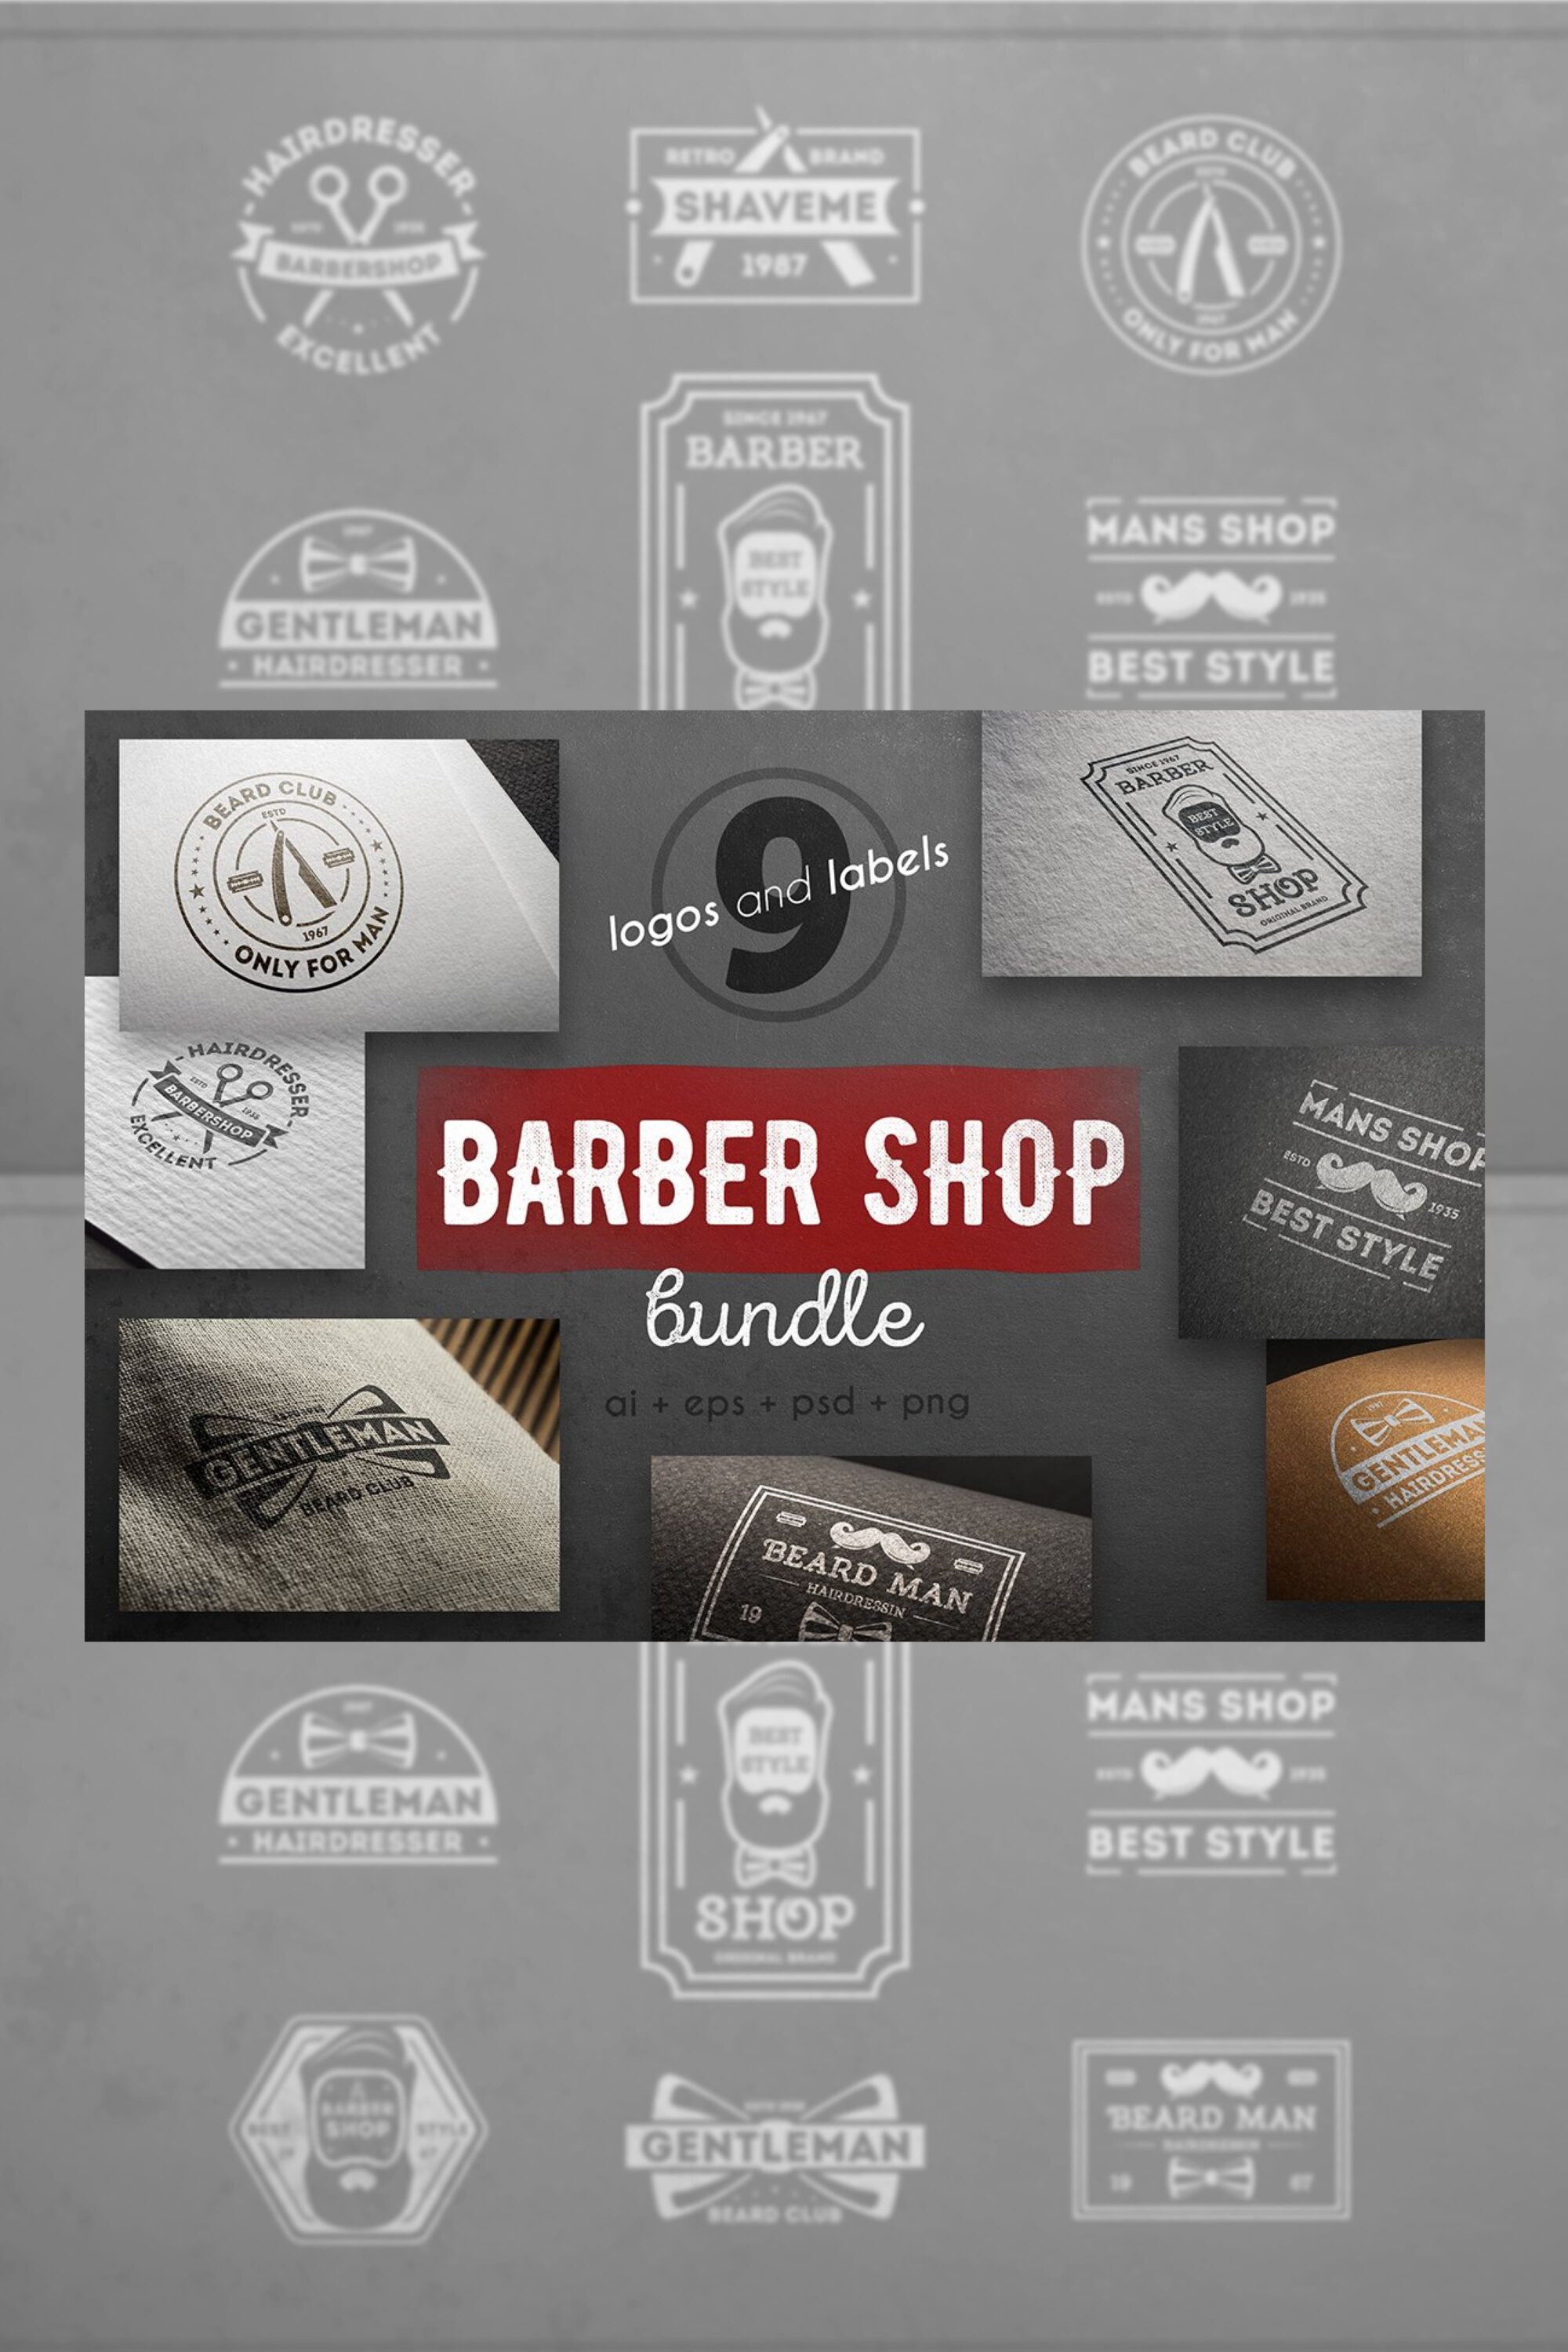 So big barber logos in a vintage style.